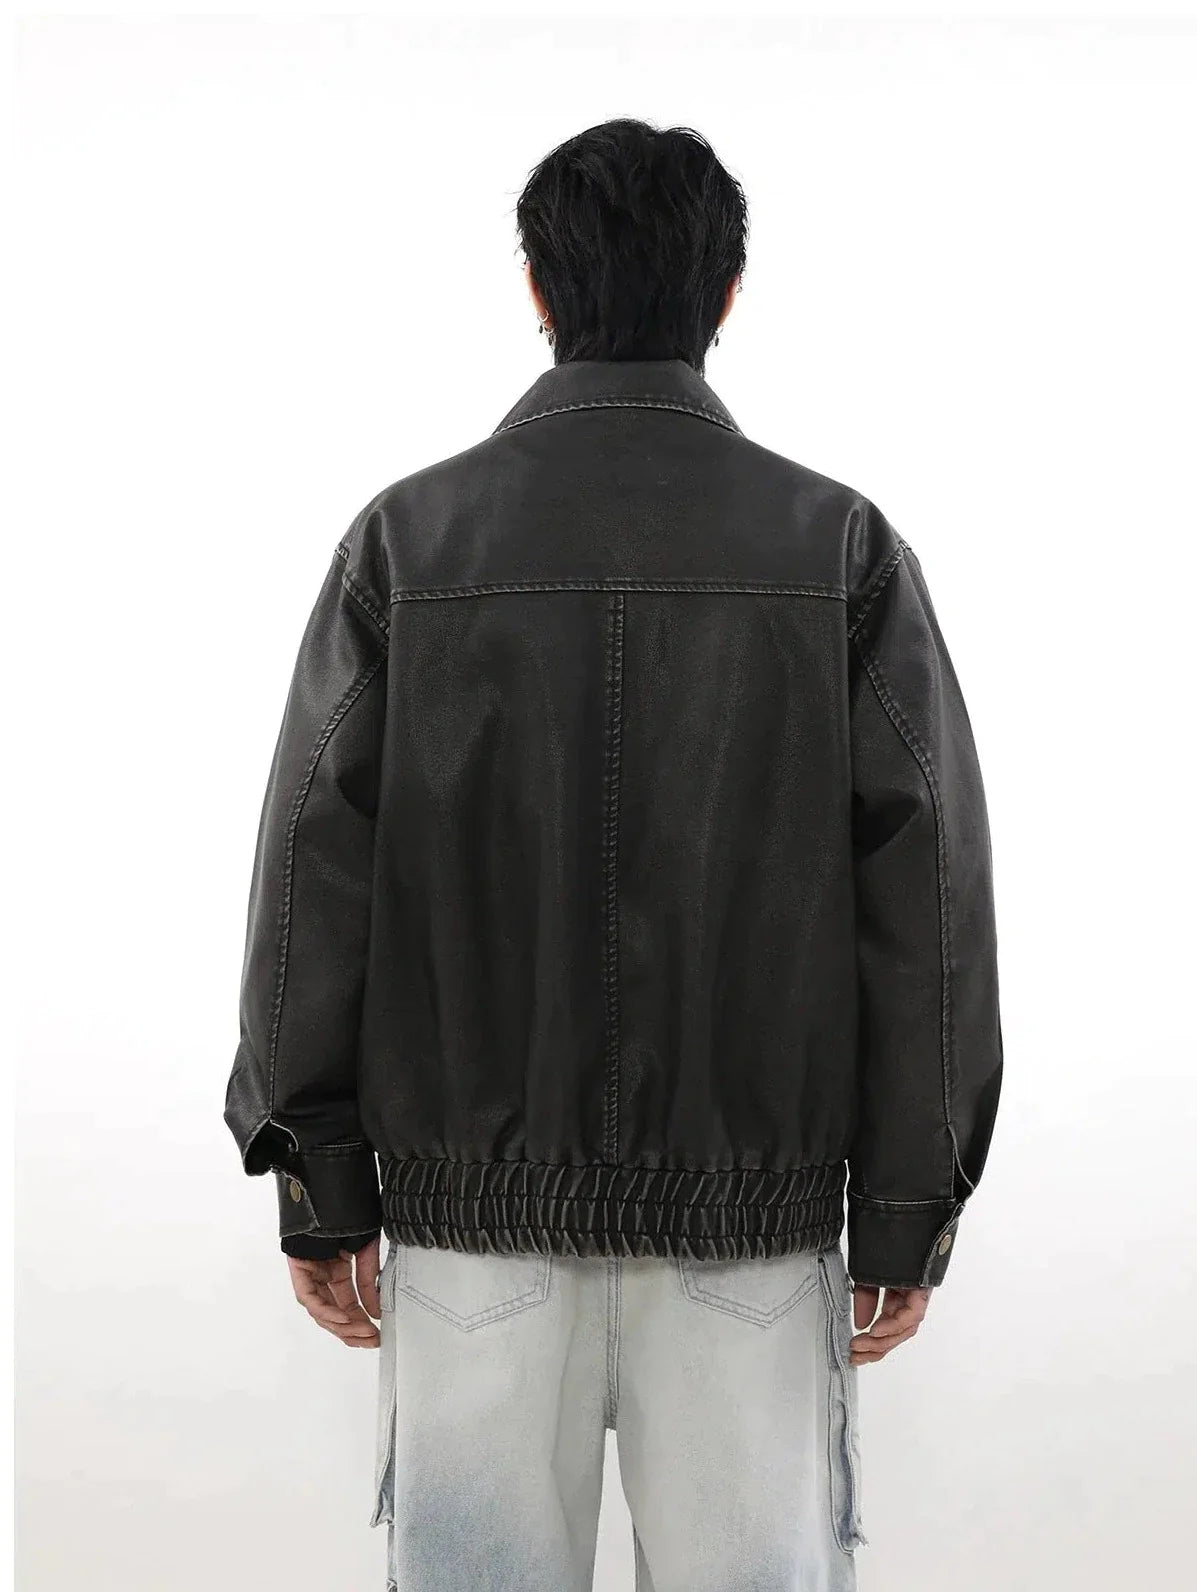 Ruched Hem Faux Leather Jacket Korean Street Fashion Jacket By Mr Nearly Shop Online at OH Vault